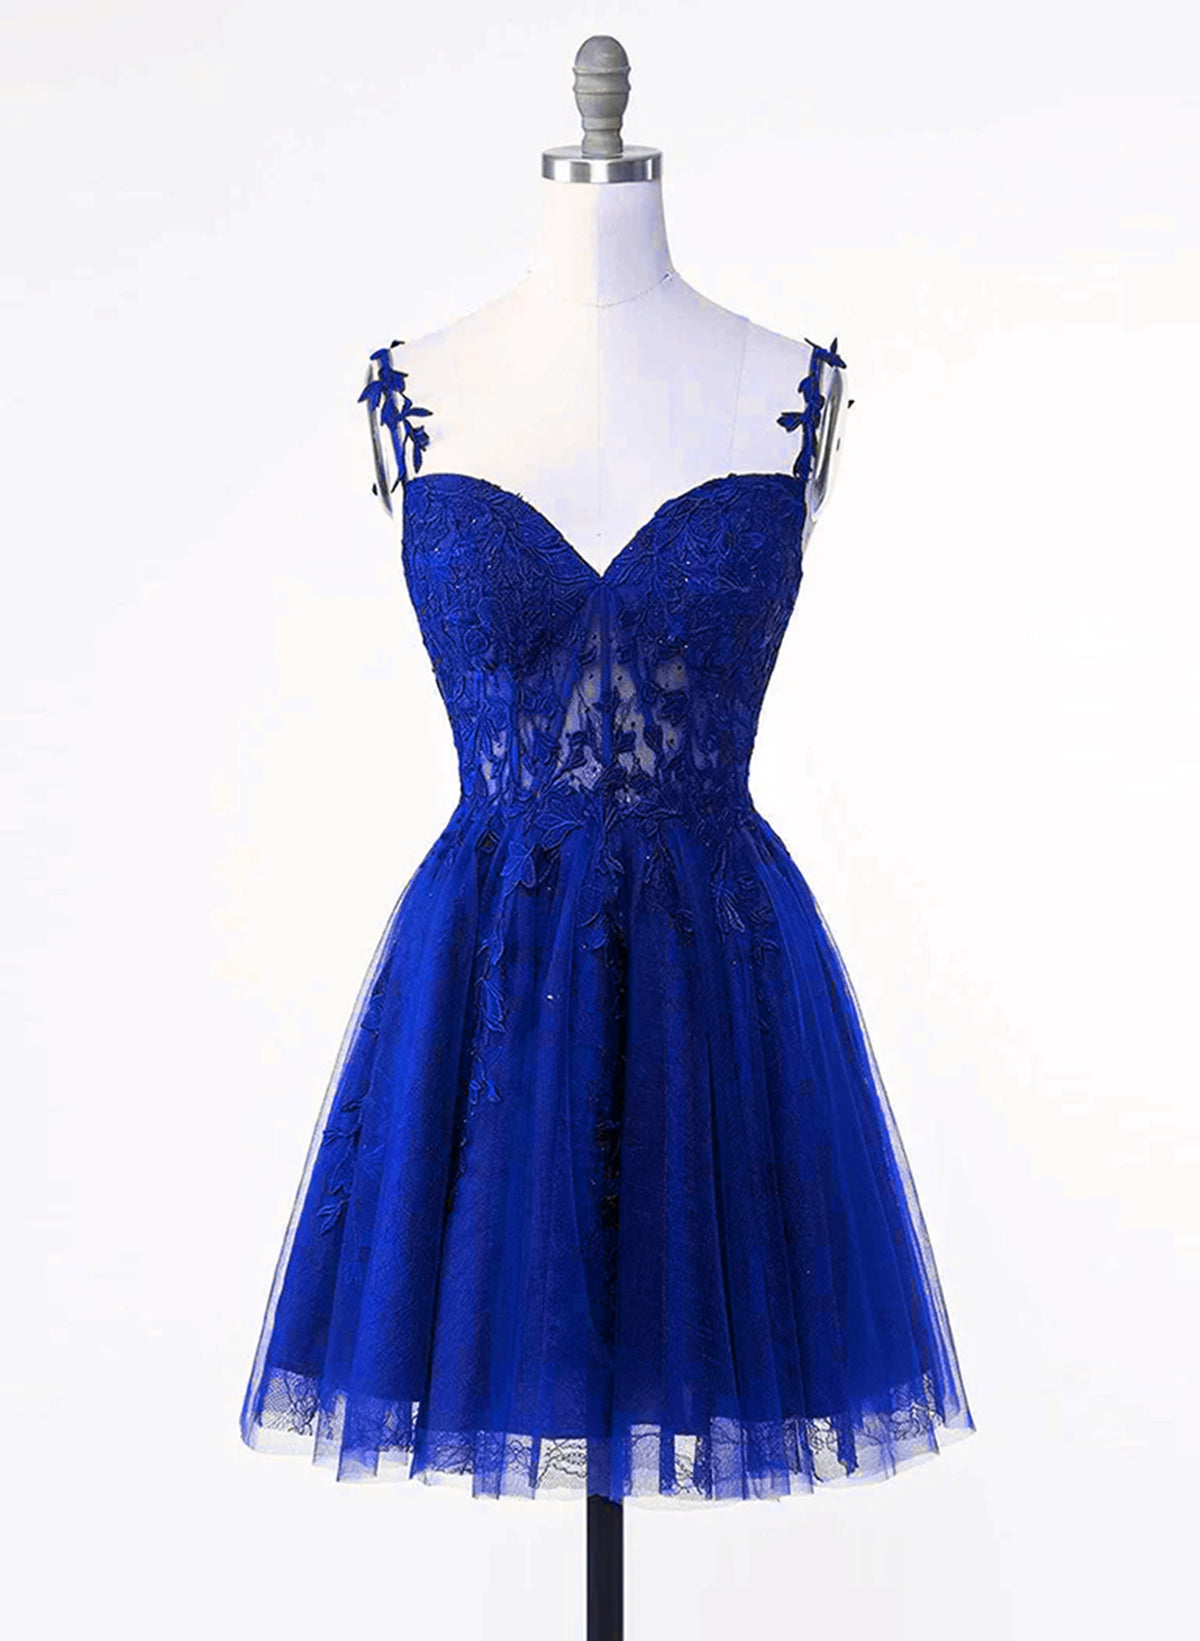 Bridesmaid Dresses Colorful, Royal Blue Tulle with Lace Applique Short Formal Dress, Royal Blue Homecoming Dress